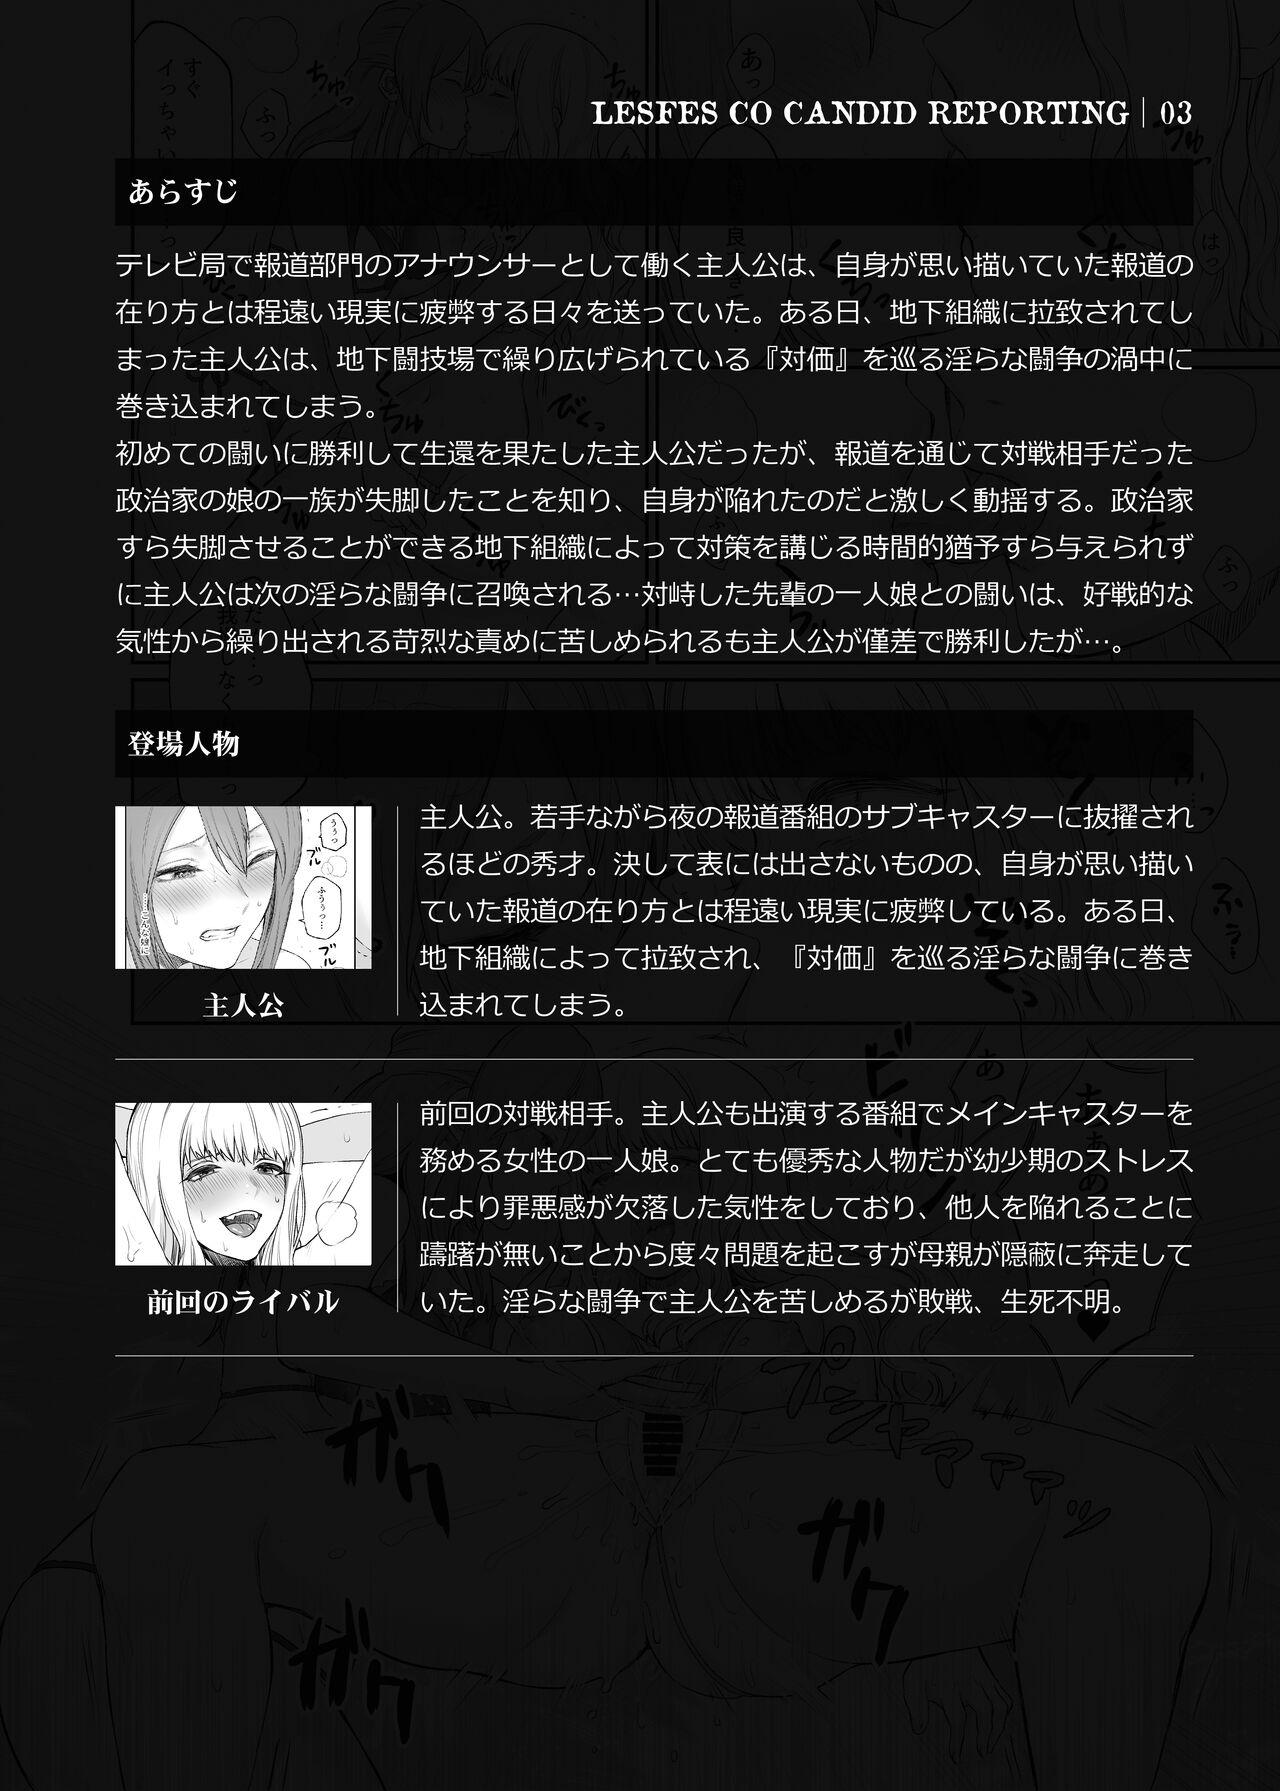 Tattooed [Remora Works (Meriko)] LesFes Co -Candid Reporting- Vol. 003 [English] - Original Gay Pawn - Page 3